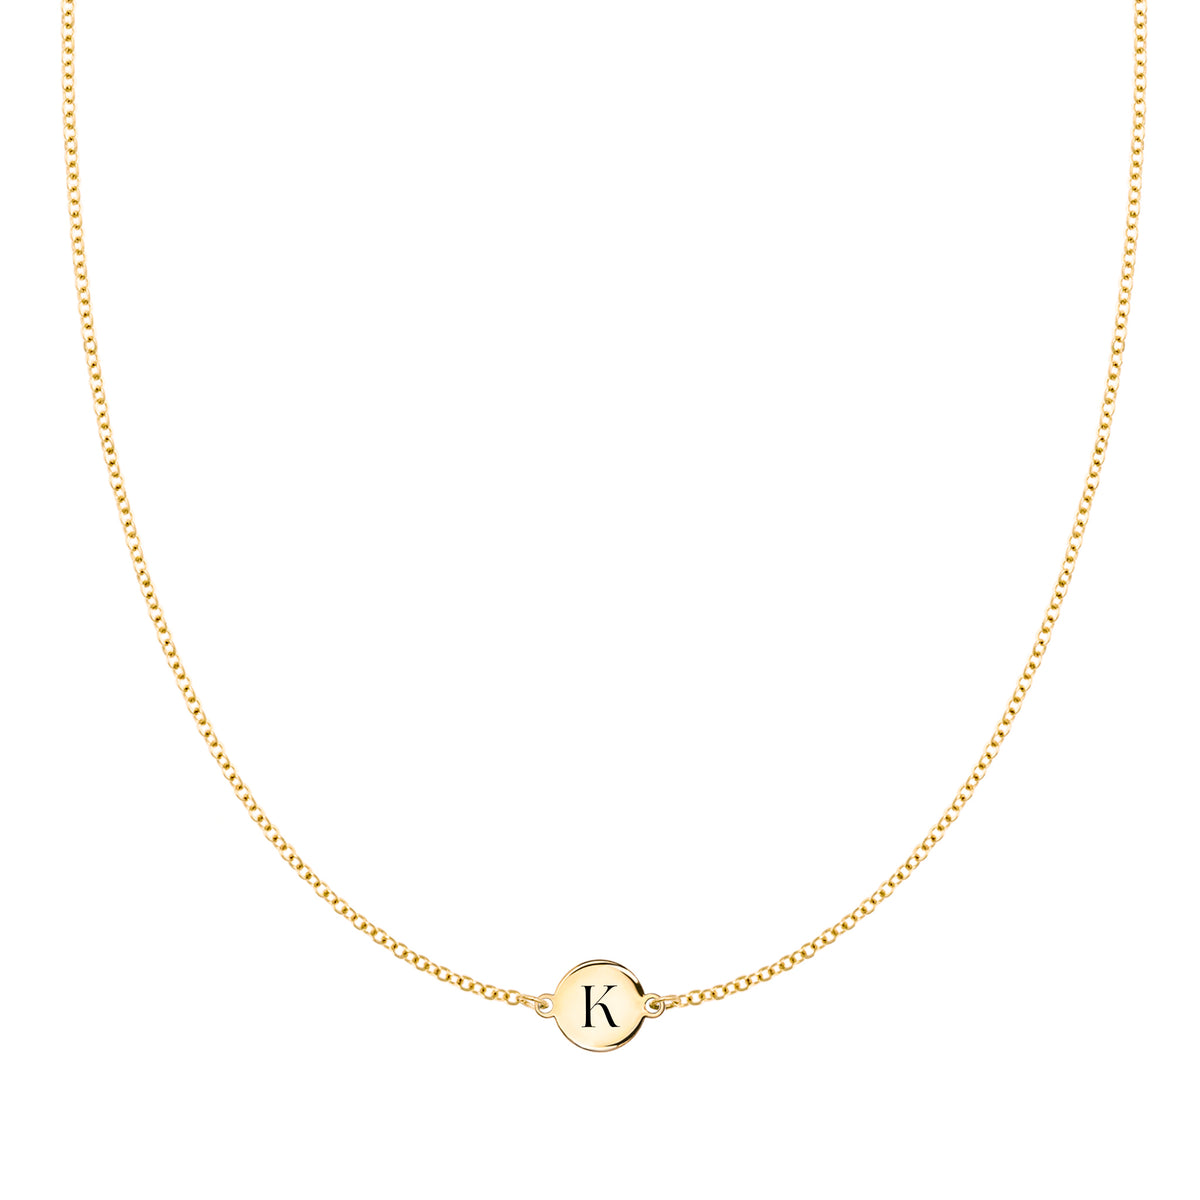 Circle Letter K Necklace in 18k Gold Plating over 925 Sterling Silver |  JOYAMO - Personalized Jewelry